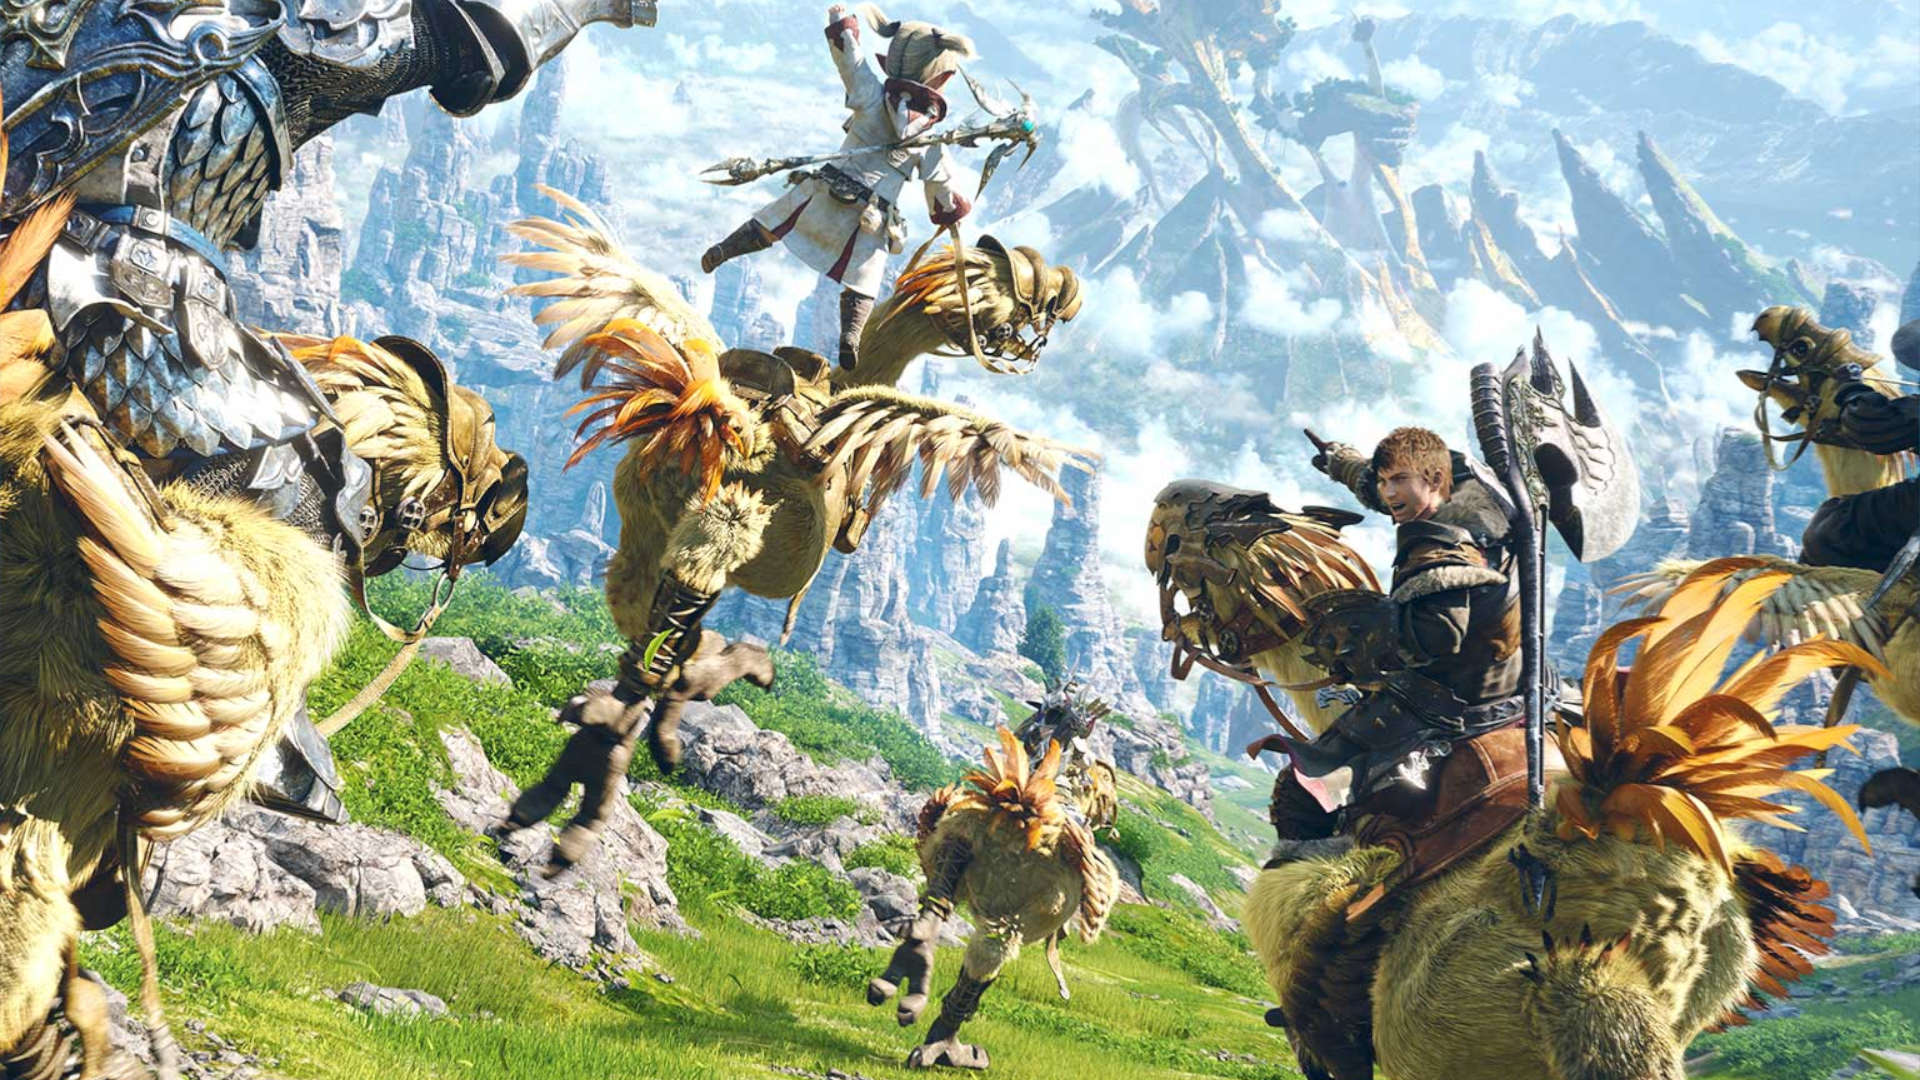 Final Fantasy is getting its first official tabletop RPG for